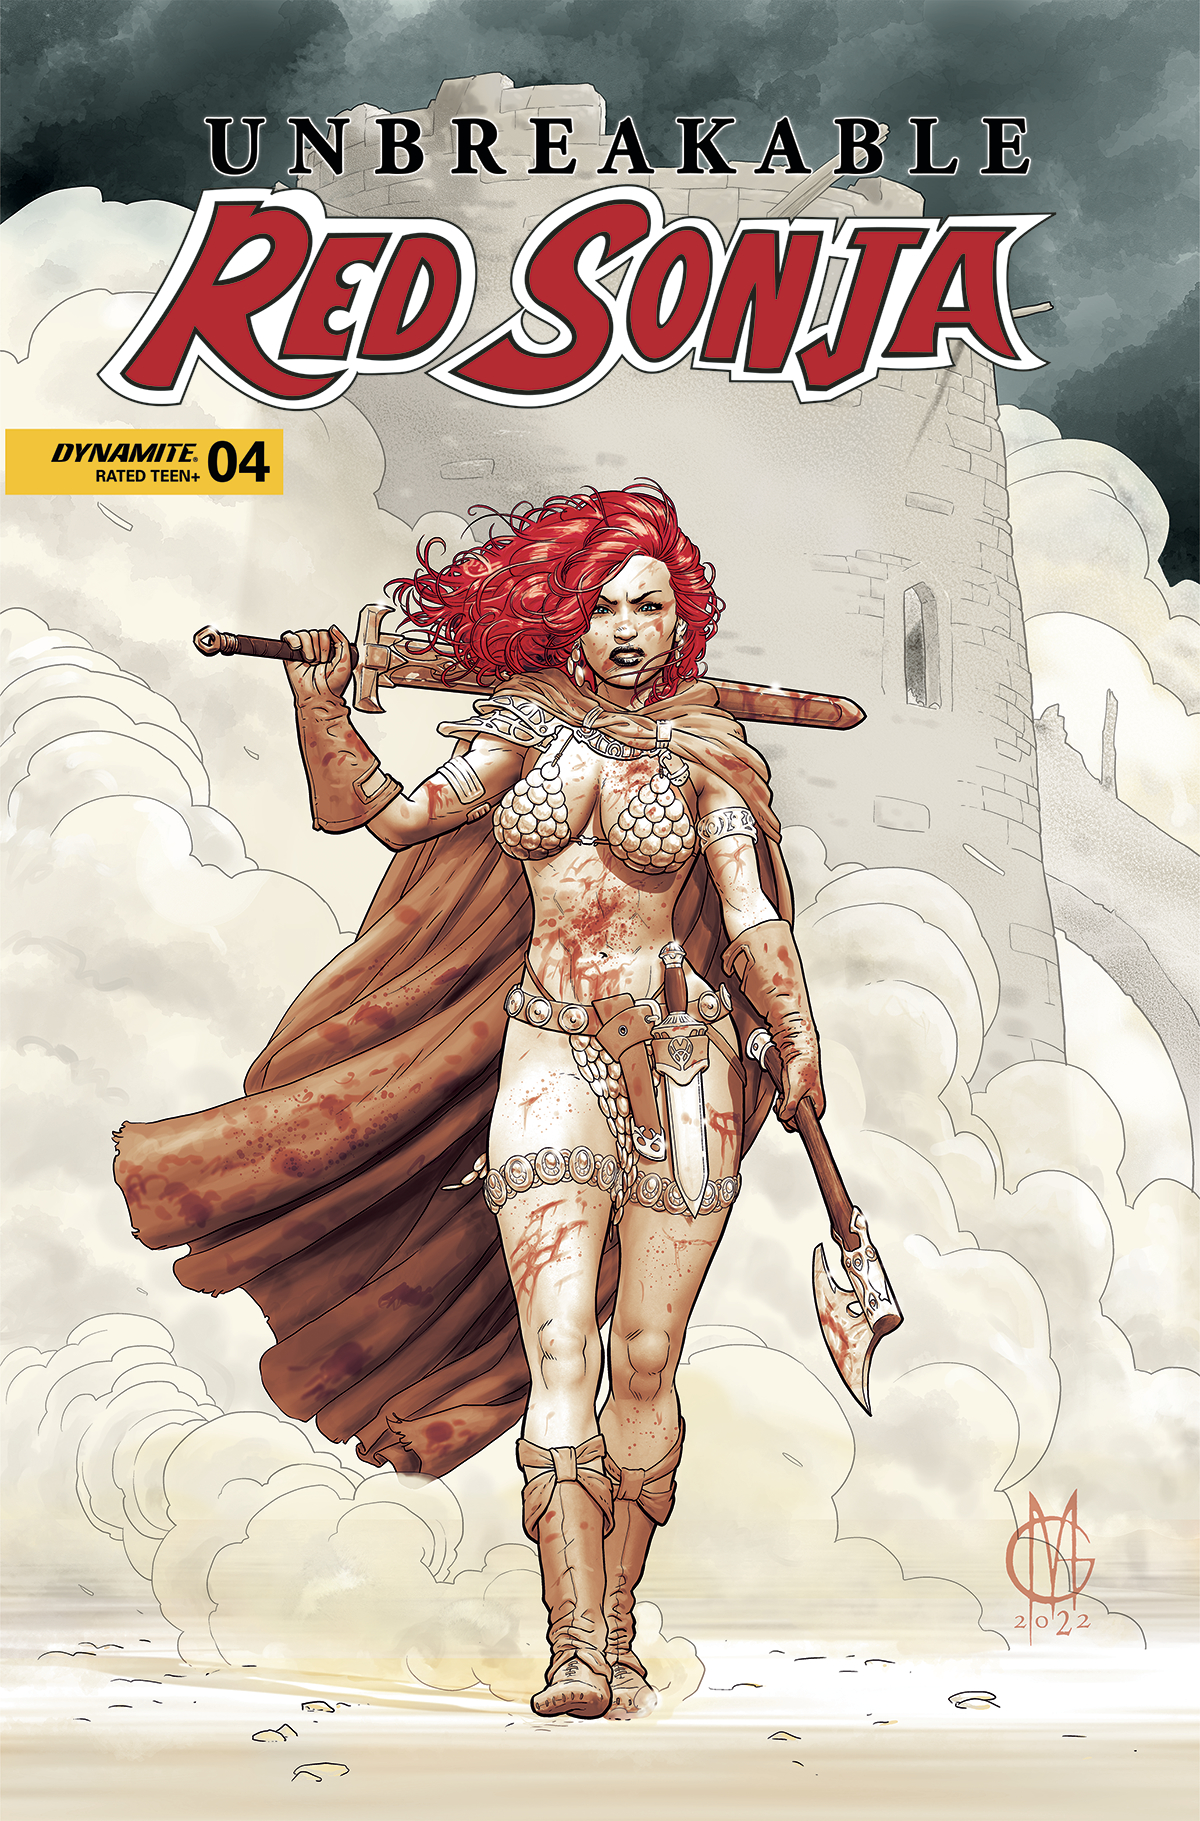 Unbreakable Red Sonja #4 Cover C Matteoni